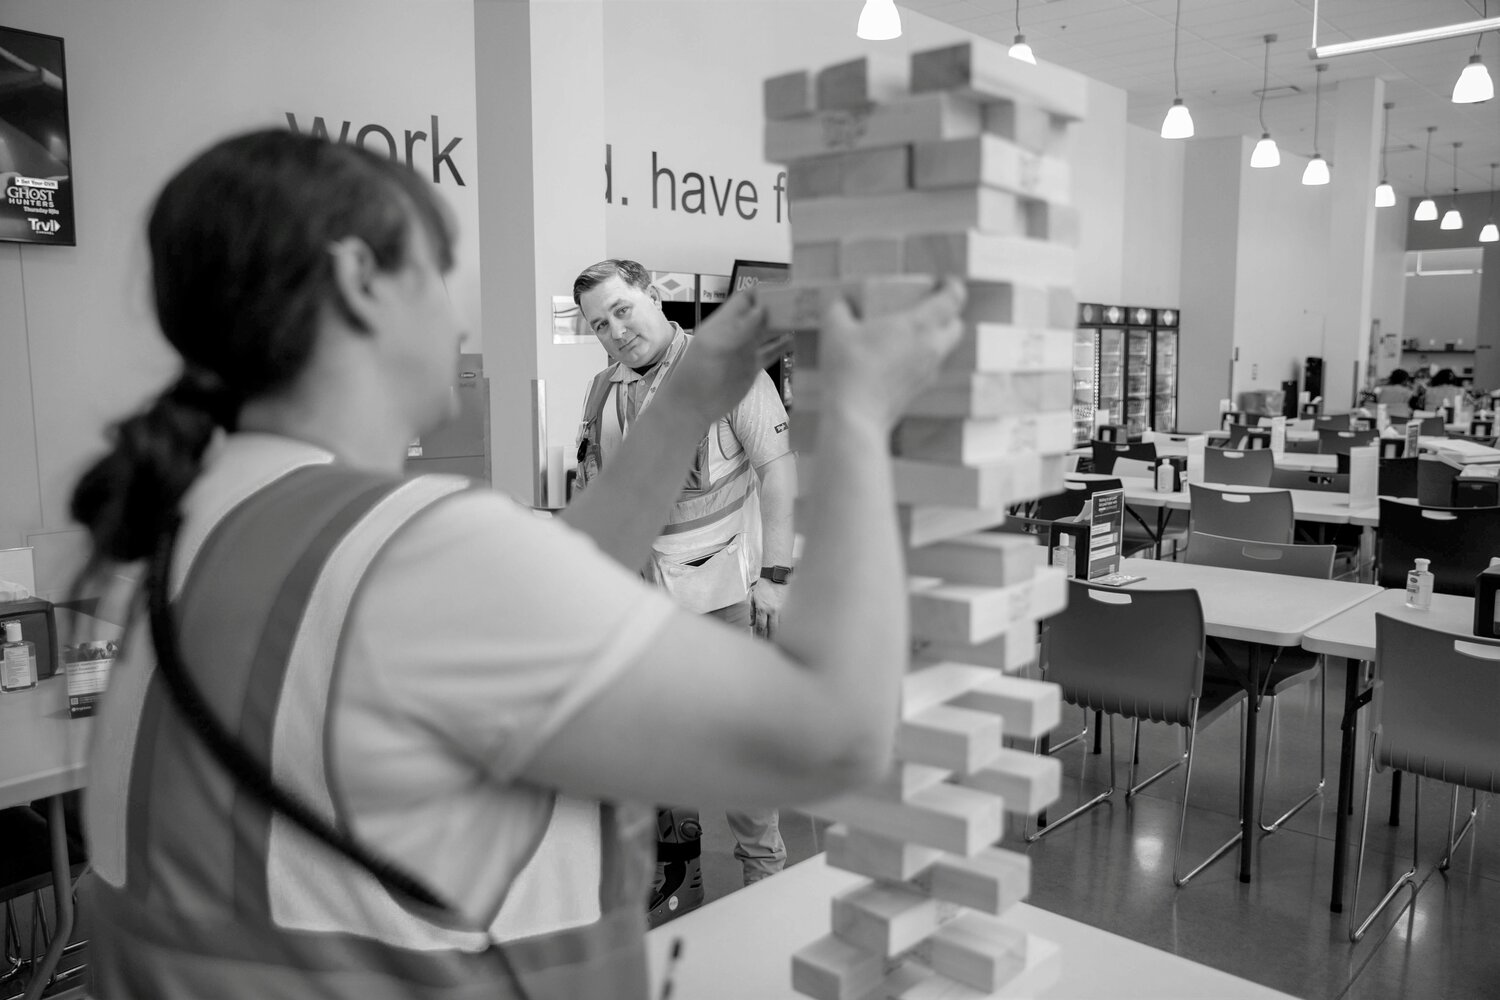 STACKING EXPERTISE: He seems skeptical of Tiffany Ruby's choice of a block as the two share a tense game of giant Jenga in the Amazon breakroom.